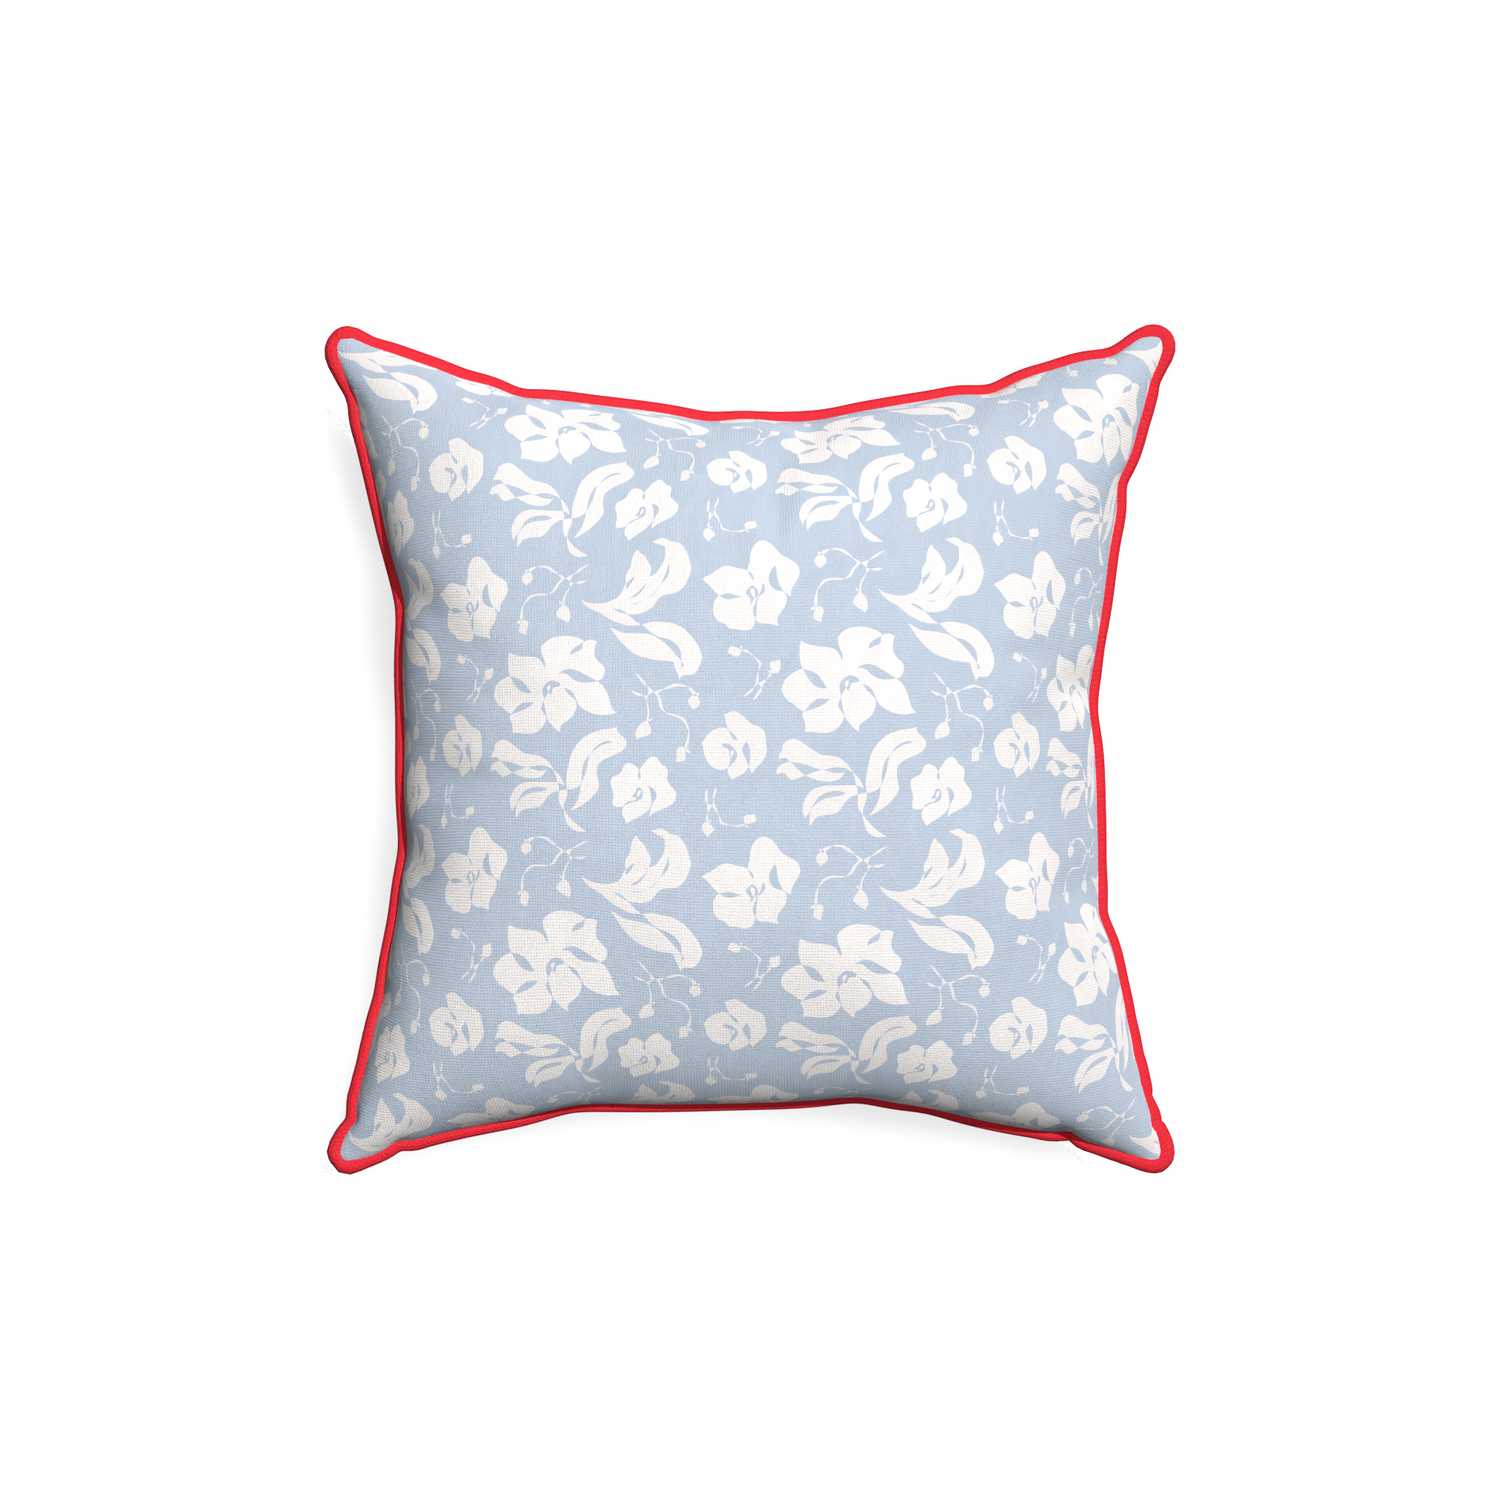 18-square georgia custom pillow with cherry piping on white background